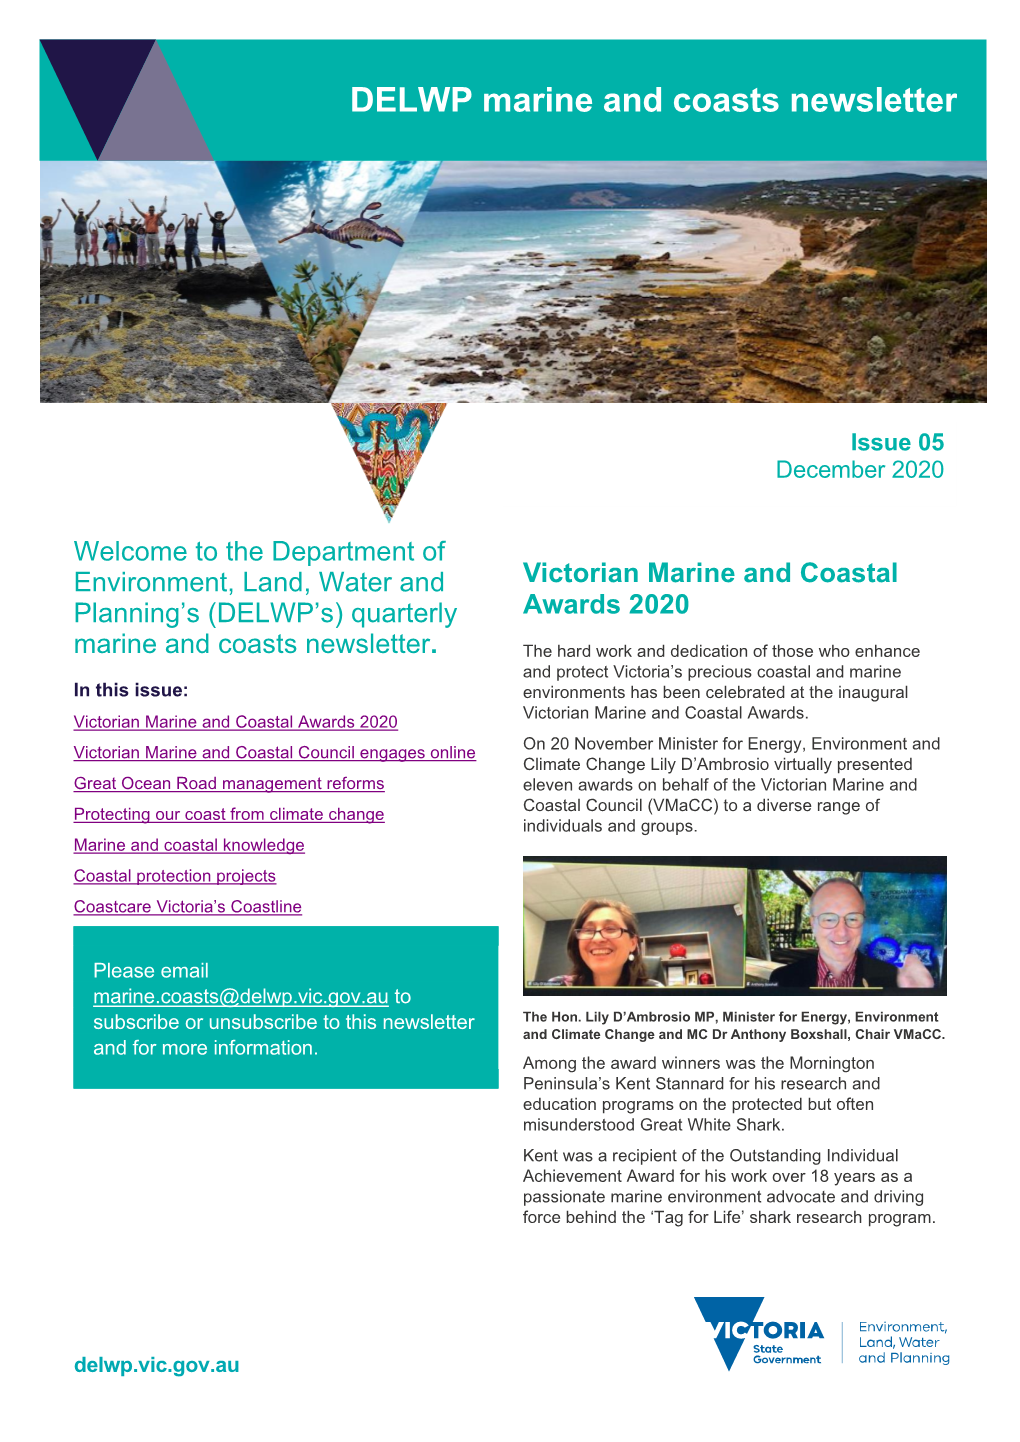 DELWP Marine and Coasts Newsletter